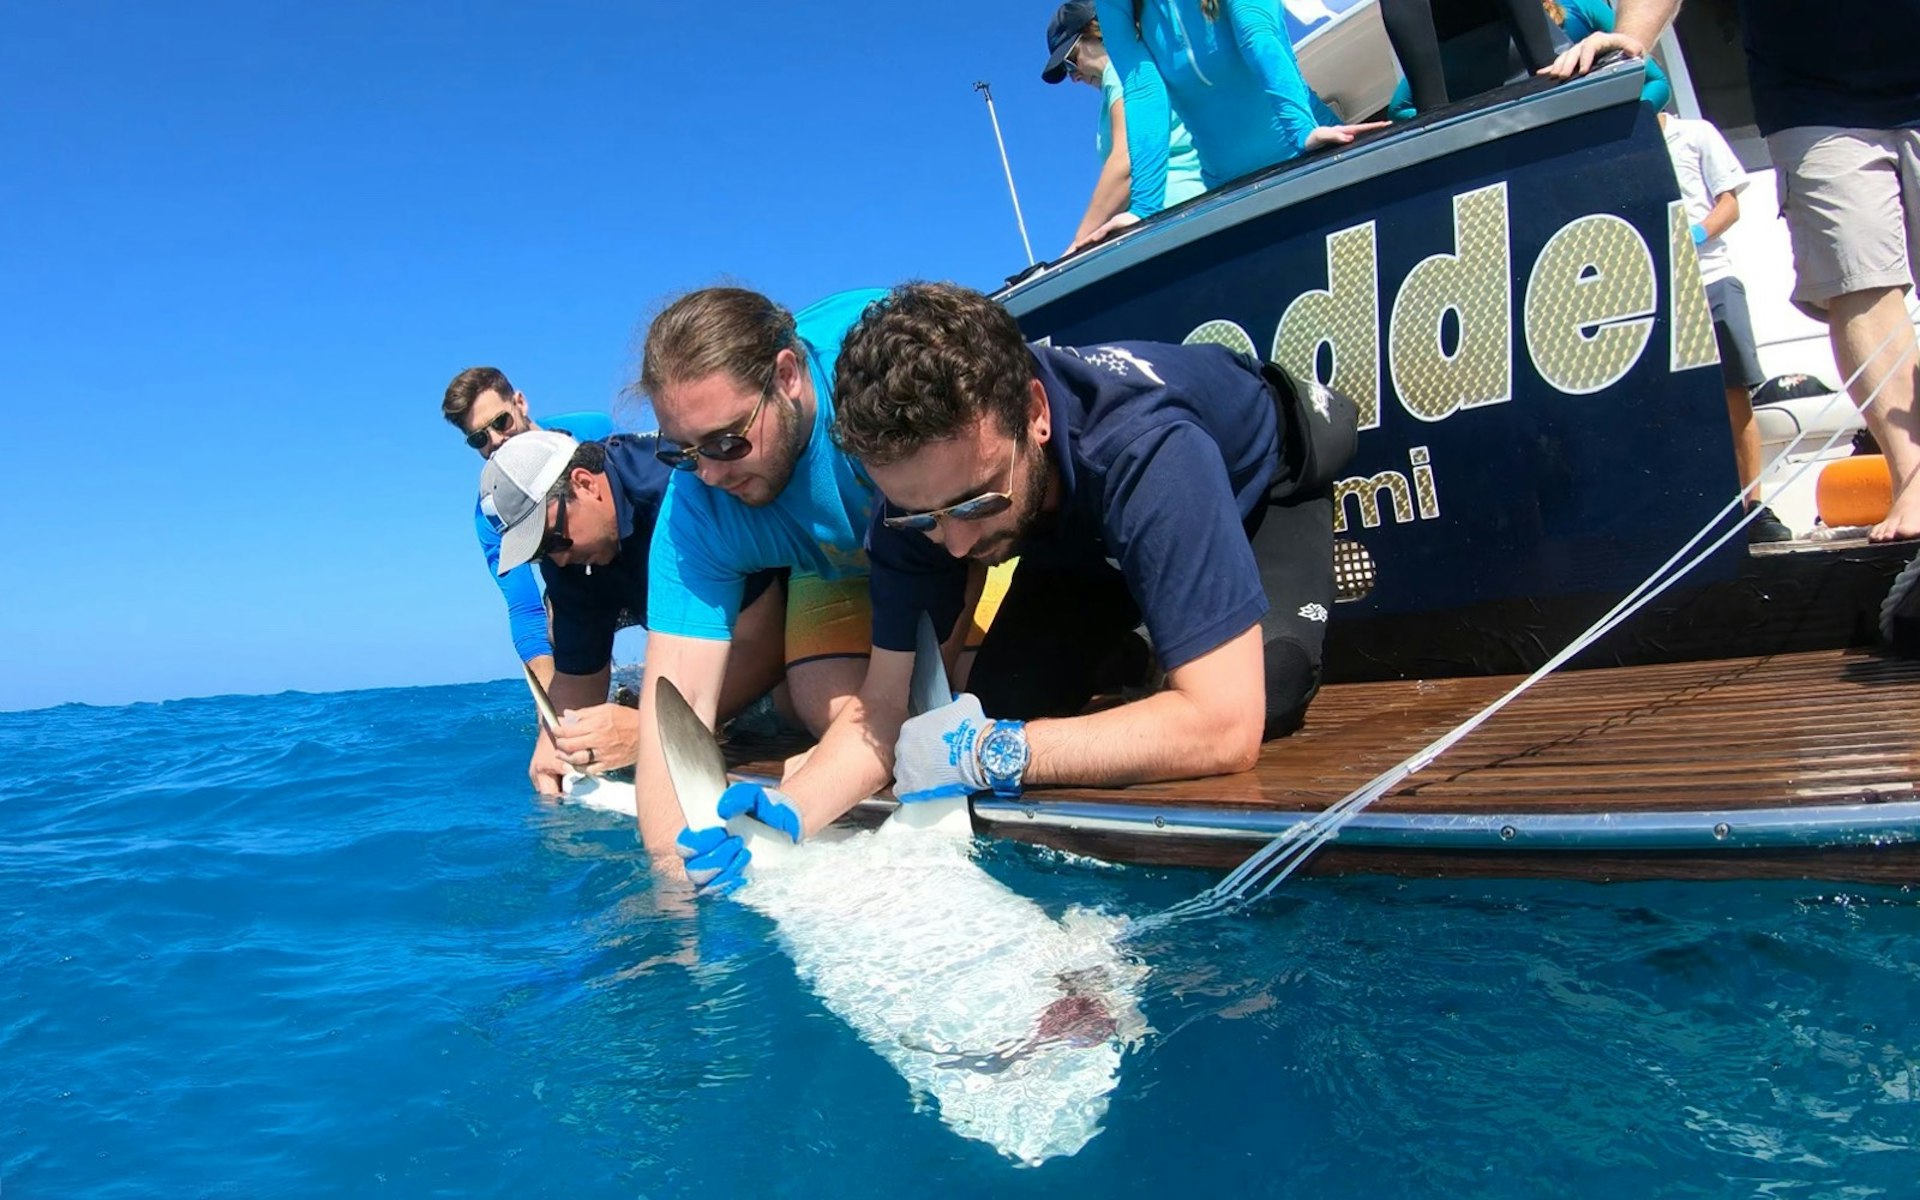 Three men secure a small shark in the water while leaning over from the deck of a boat